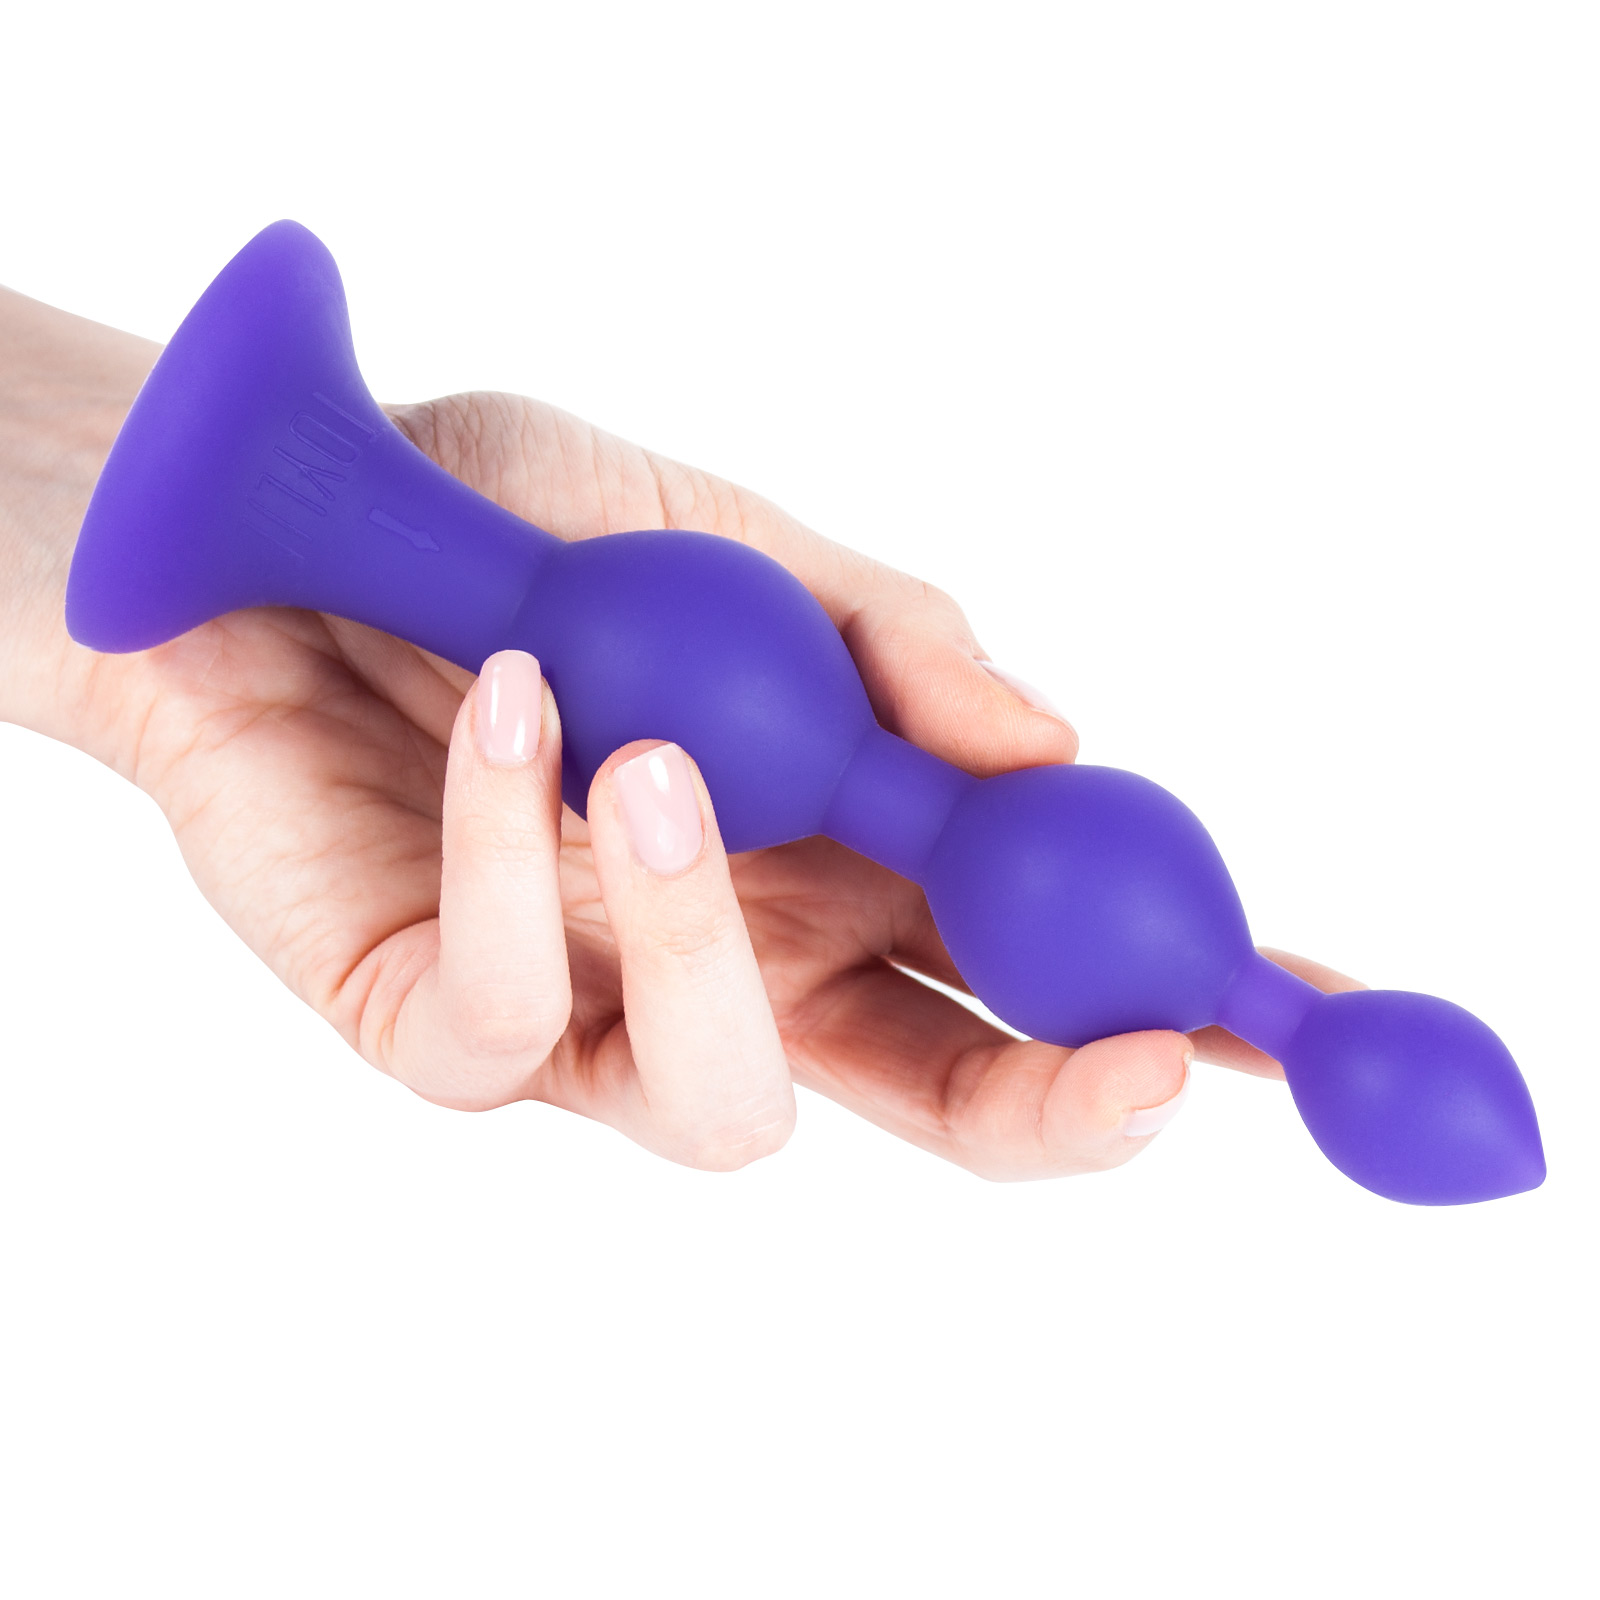 Toylie Silikon Anal Dildo «Bullet» purple, velvety smooth anal dildo for her and him with suction cup